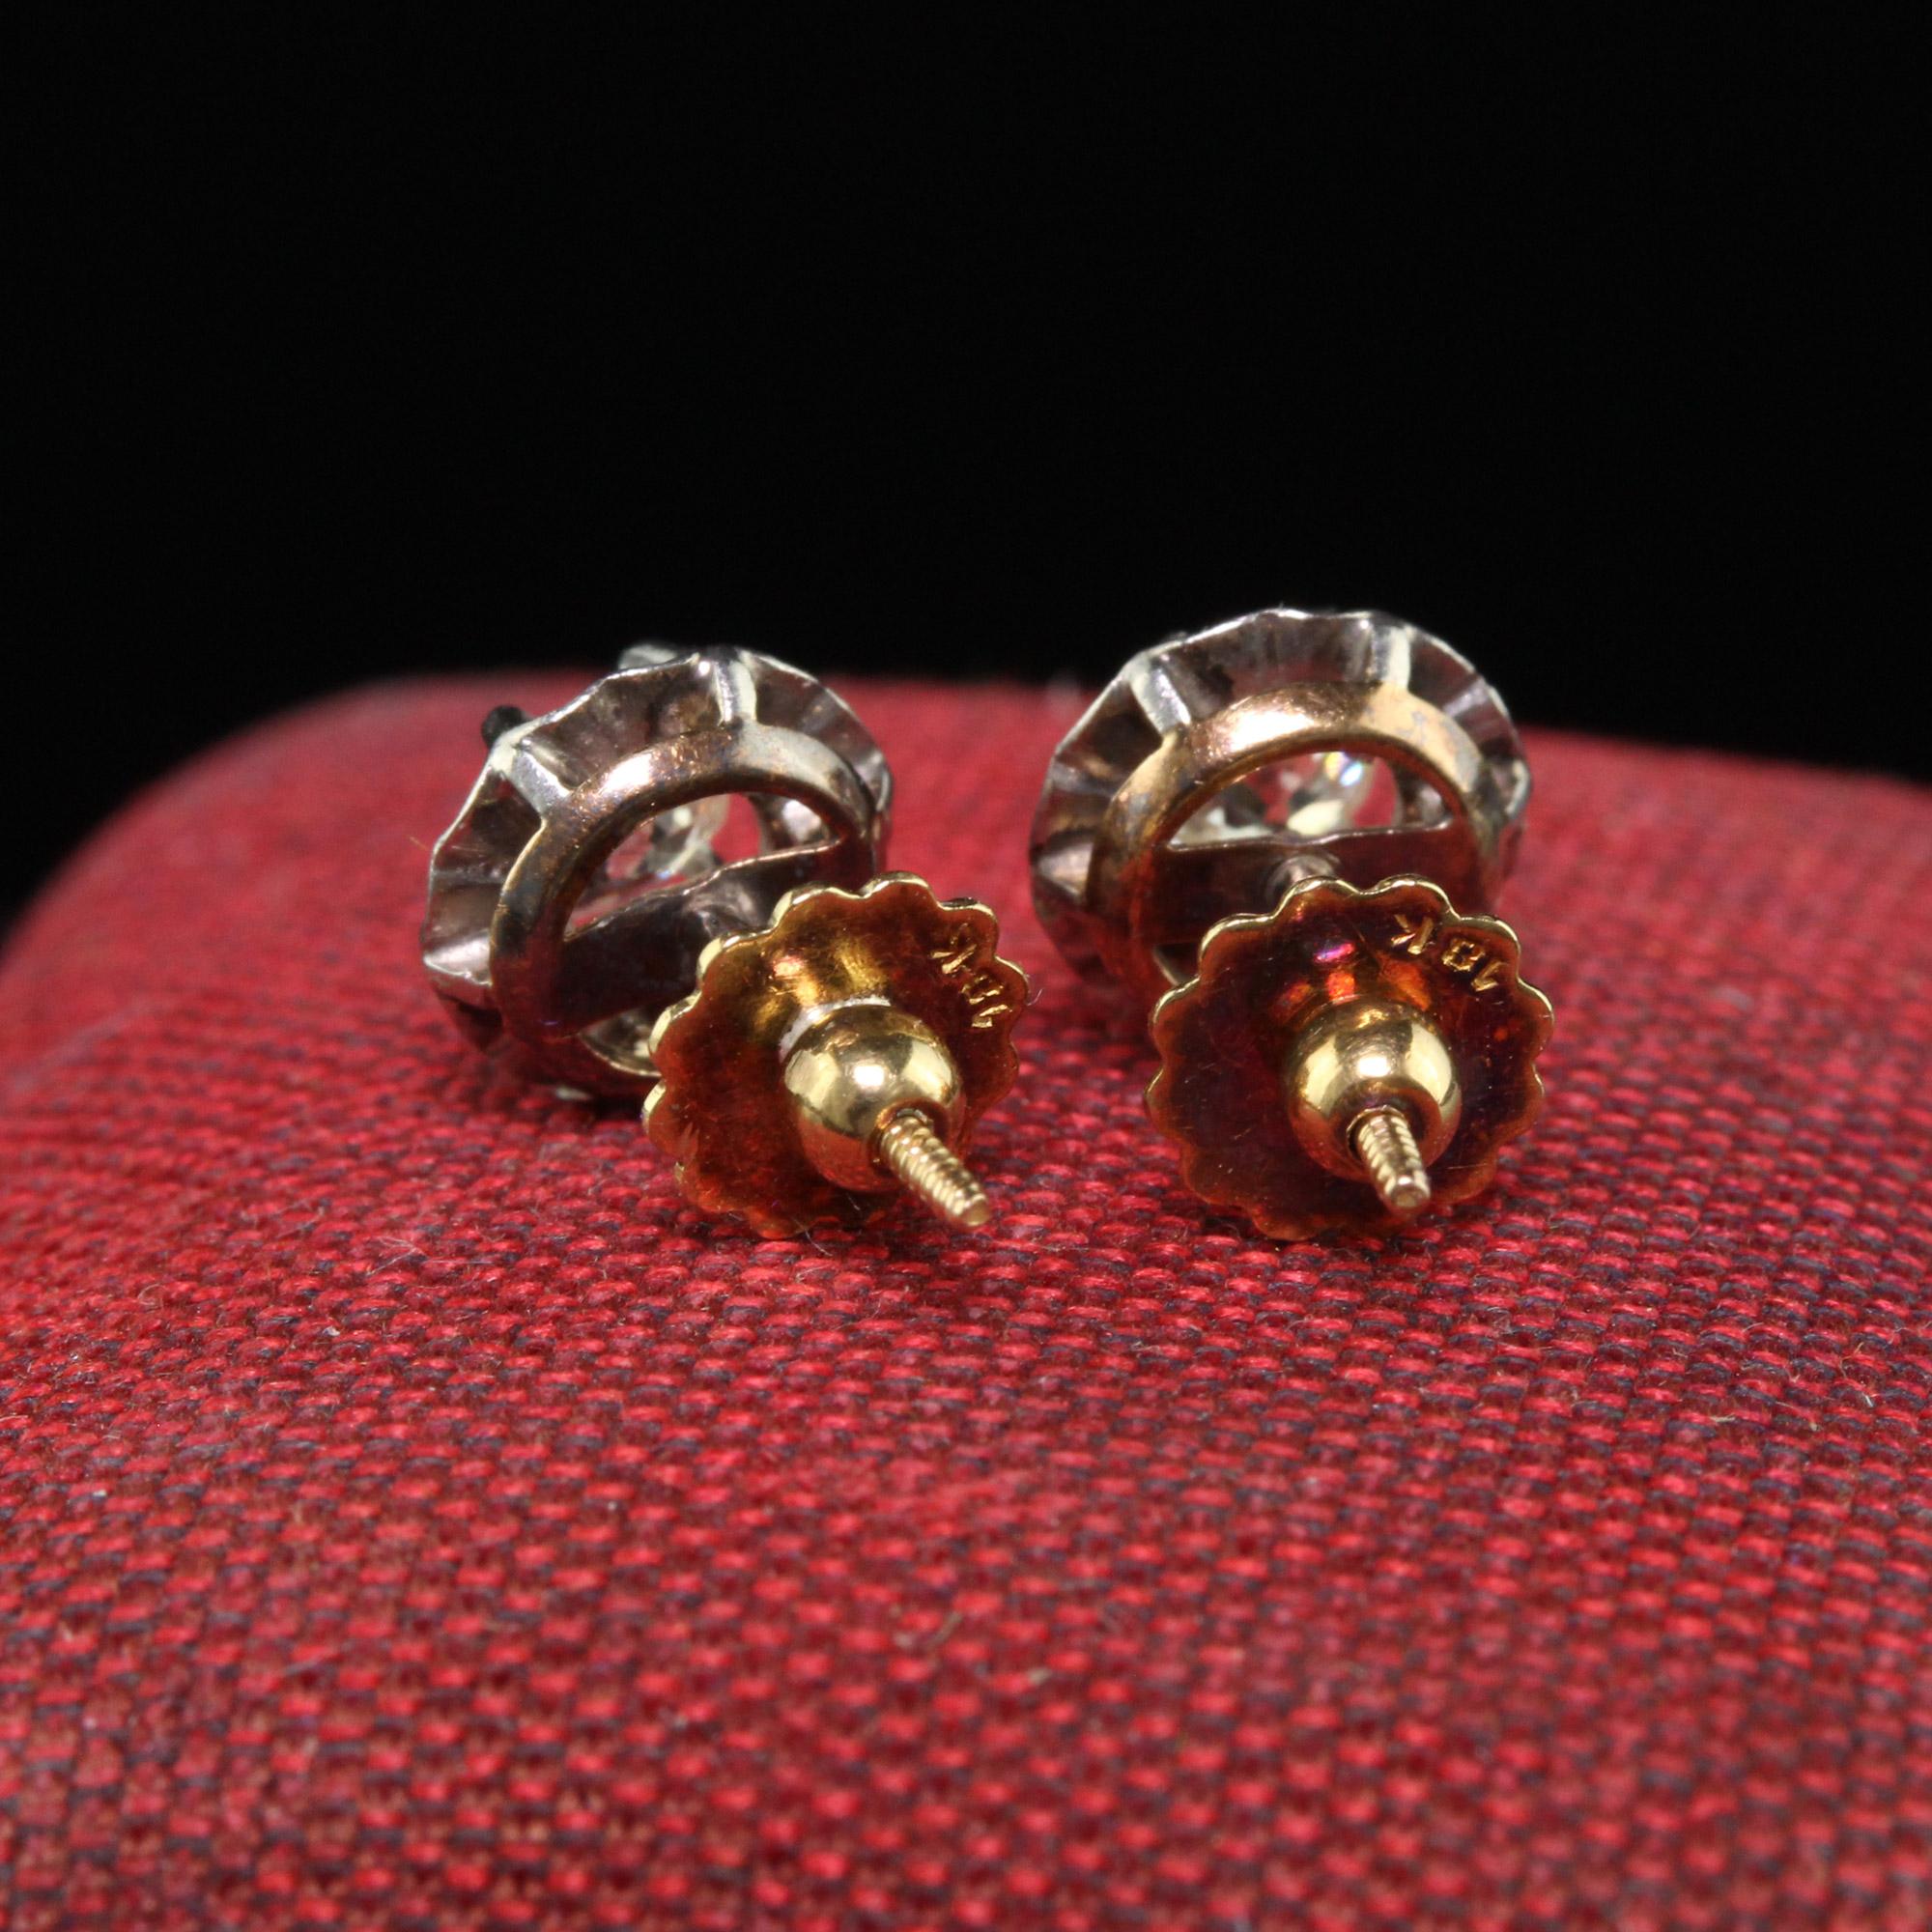 Antique Edwardian 18K Yellow Gold and Platinum Old Mine Diamond Stud Earrings In Good Condition For Sale In Great Neck, NY